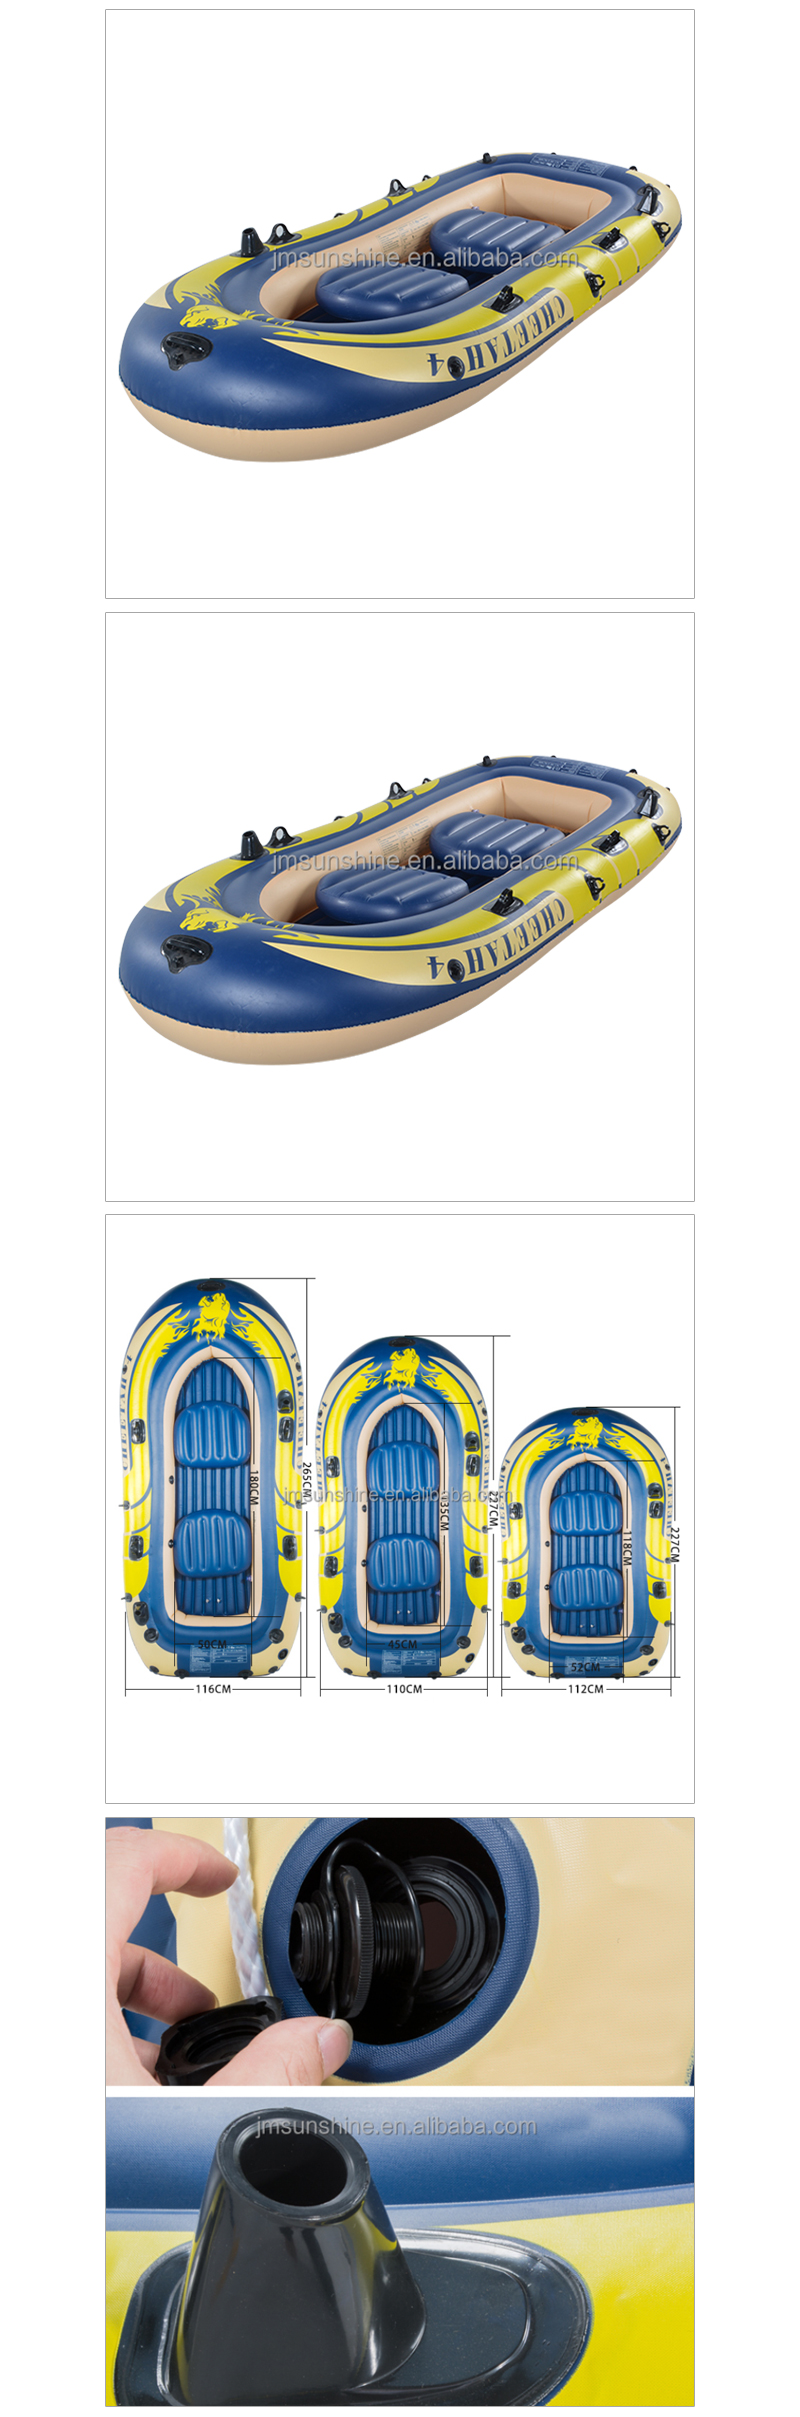 High performance Inflatable Kayak Thickened Fishing Boat_02